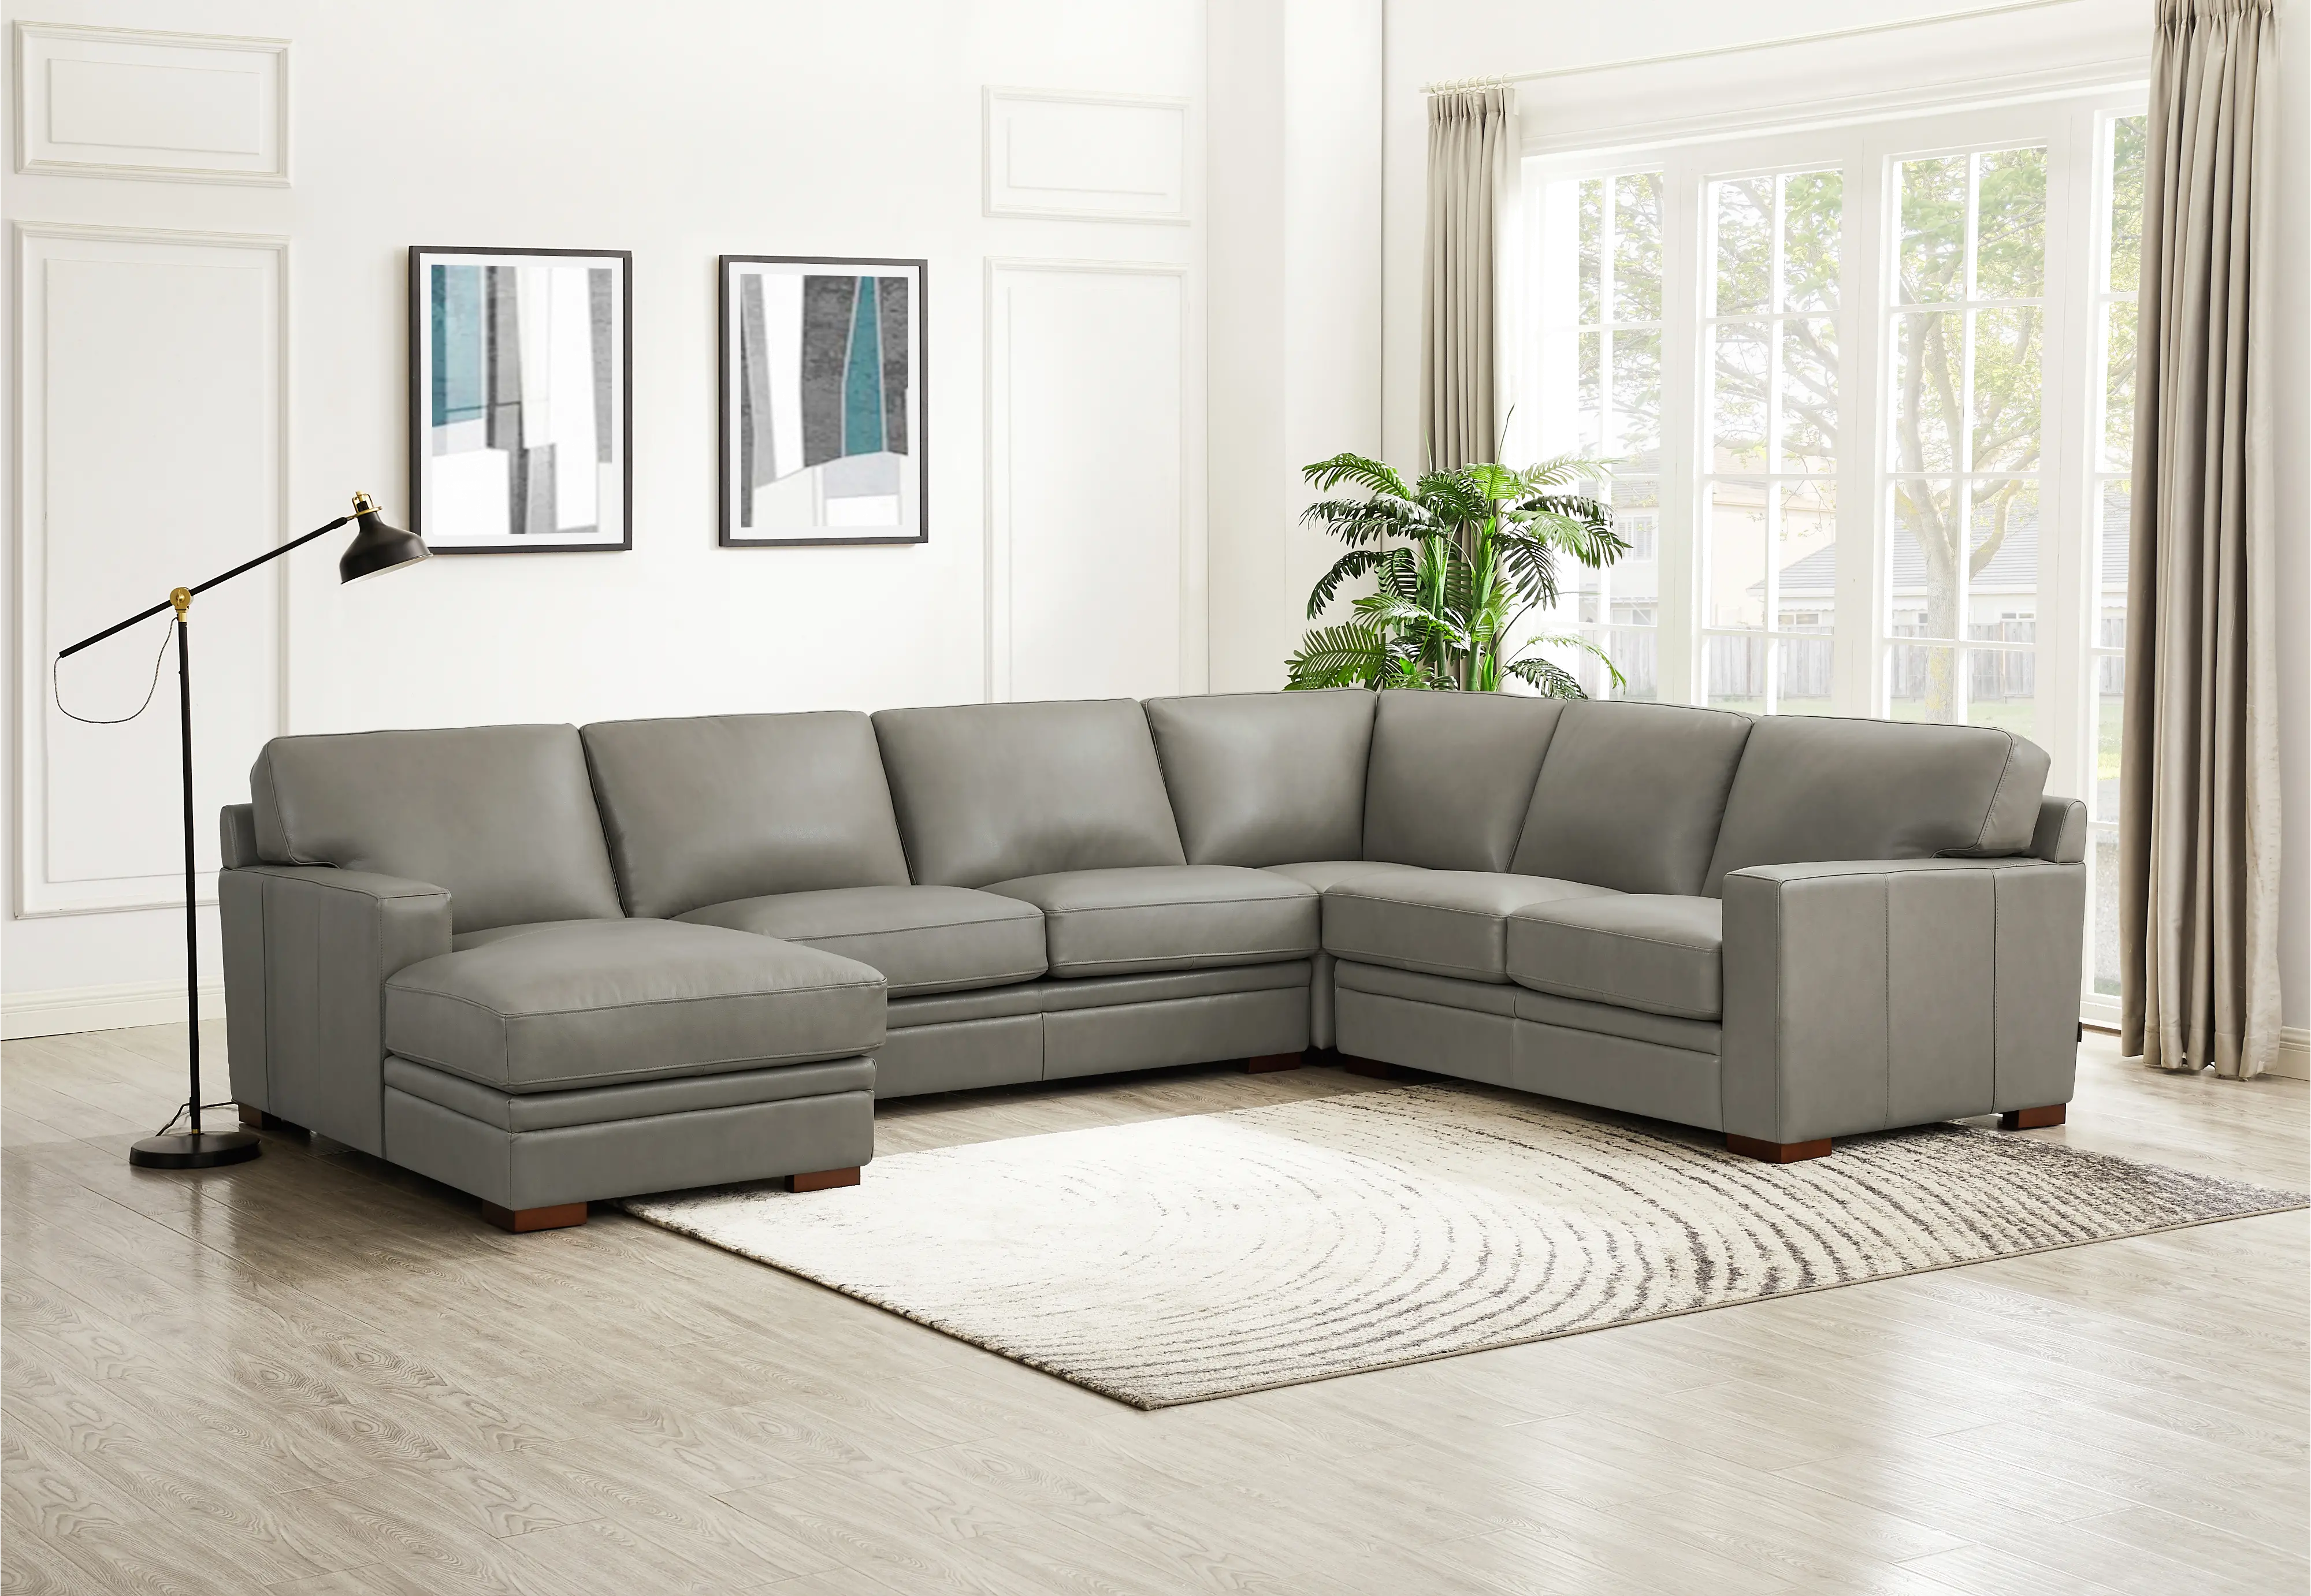 Chatsworth Gray Leather 4 Piece Sectional with Left-Facing Chaise